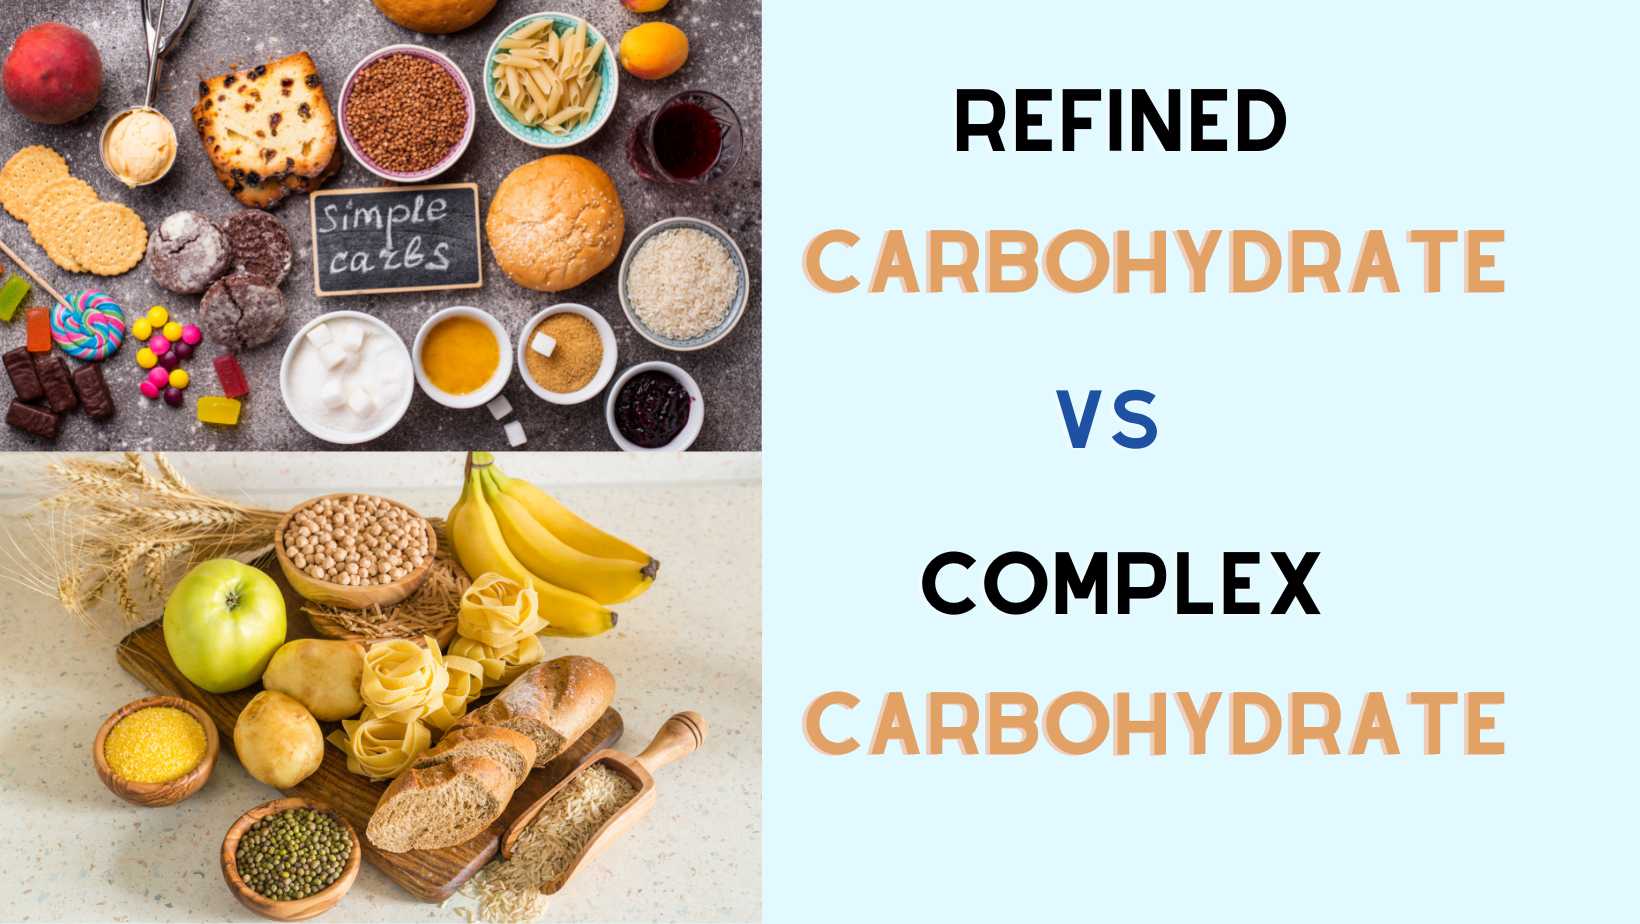 Consuming whole carbohydrates is generally considered healthier than consuming refined carbohydrates. Whole carbohydrates provide a slow and steady release of energy, thanks to their higher fiber content. They also provide important nutrients that are essential for overall health. In contrast, refined carbohydrates can cause blood sugar spikes and provide empty calories.